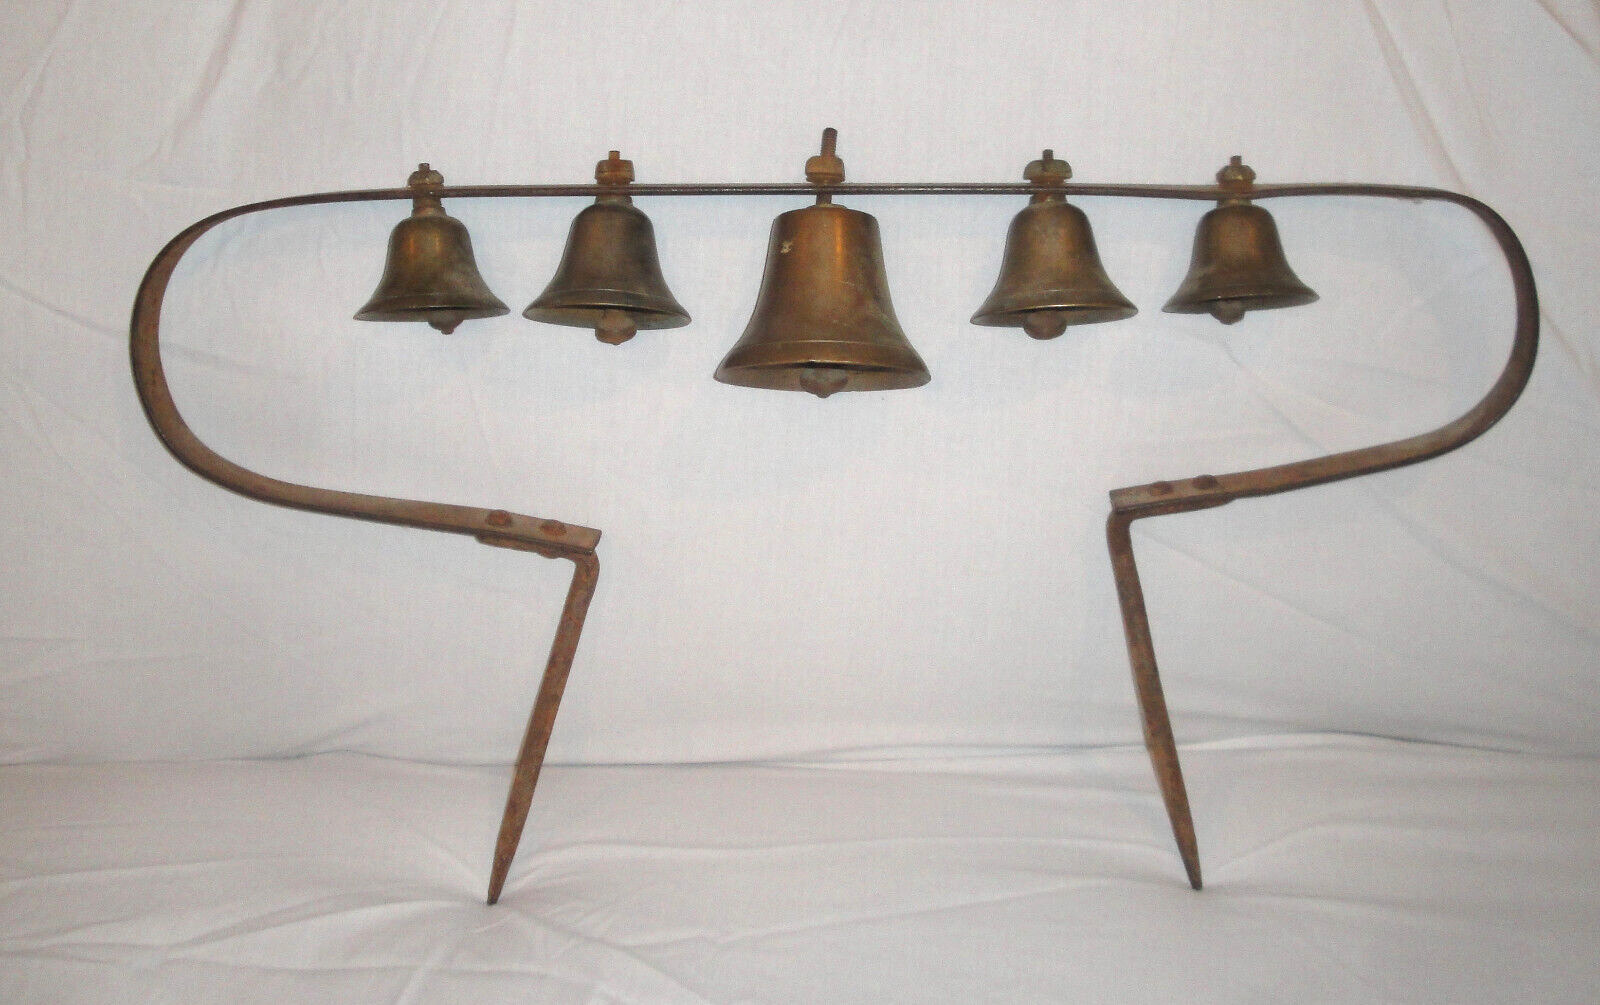 Antique Conestoga Brass Bells,Horse Hame Wagon Carriage,Large Sleigh Bell Rack